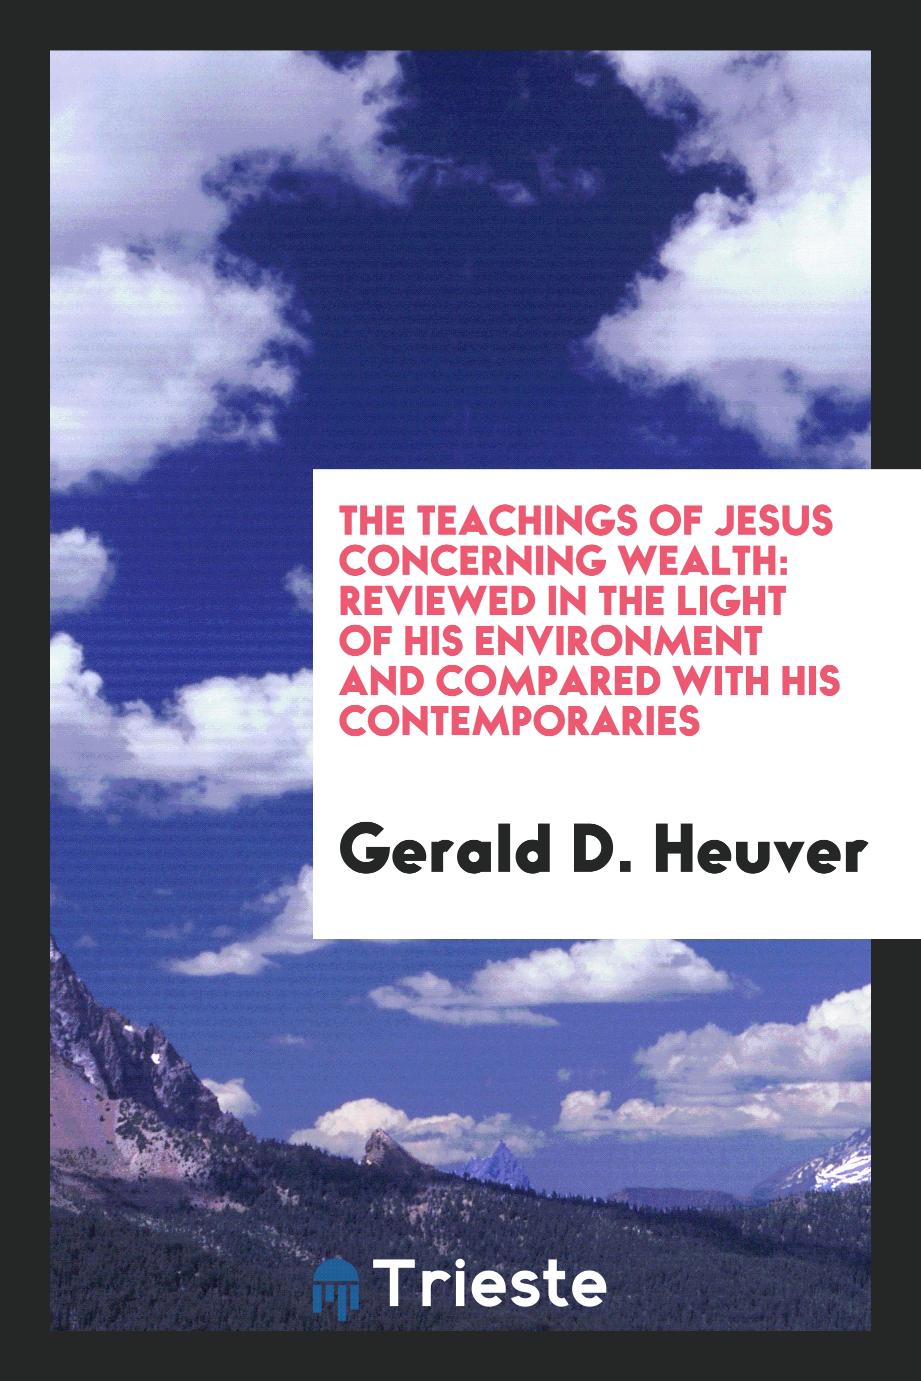 The Teachings of Jesus Concerning Wealth: Reviewed in the Light of His Environment and Compared with His Contemporaries